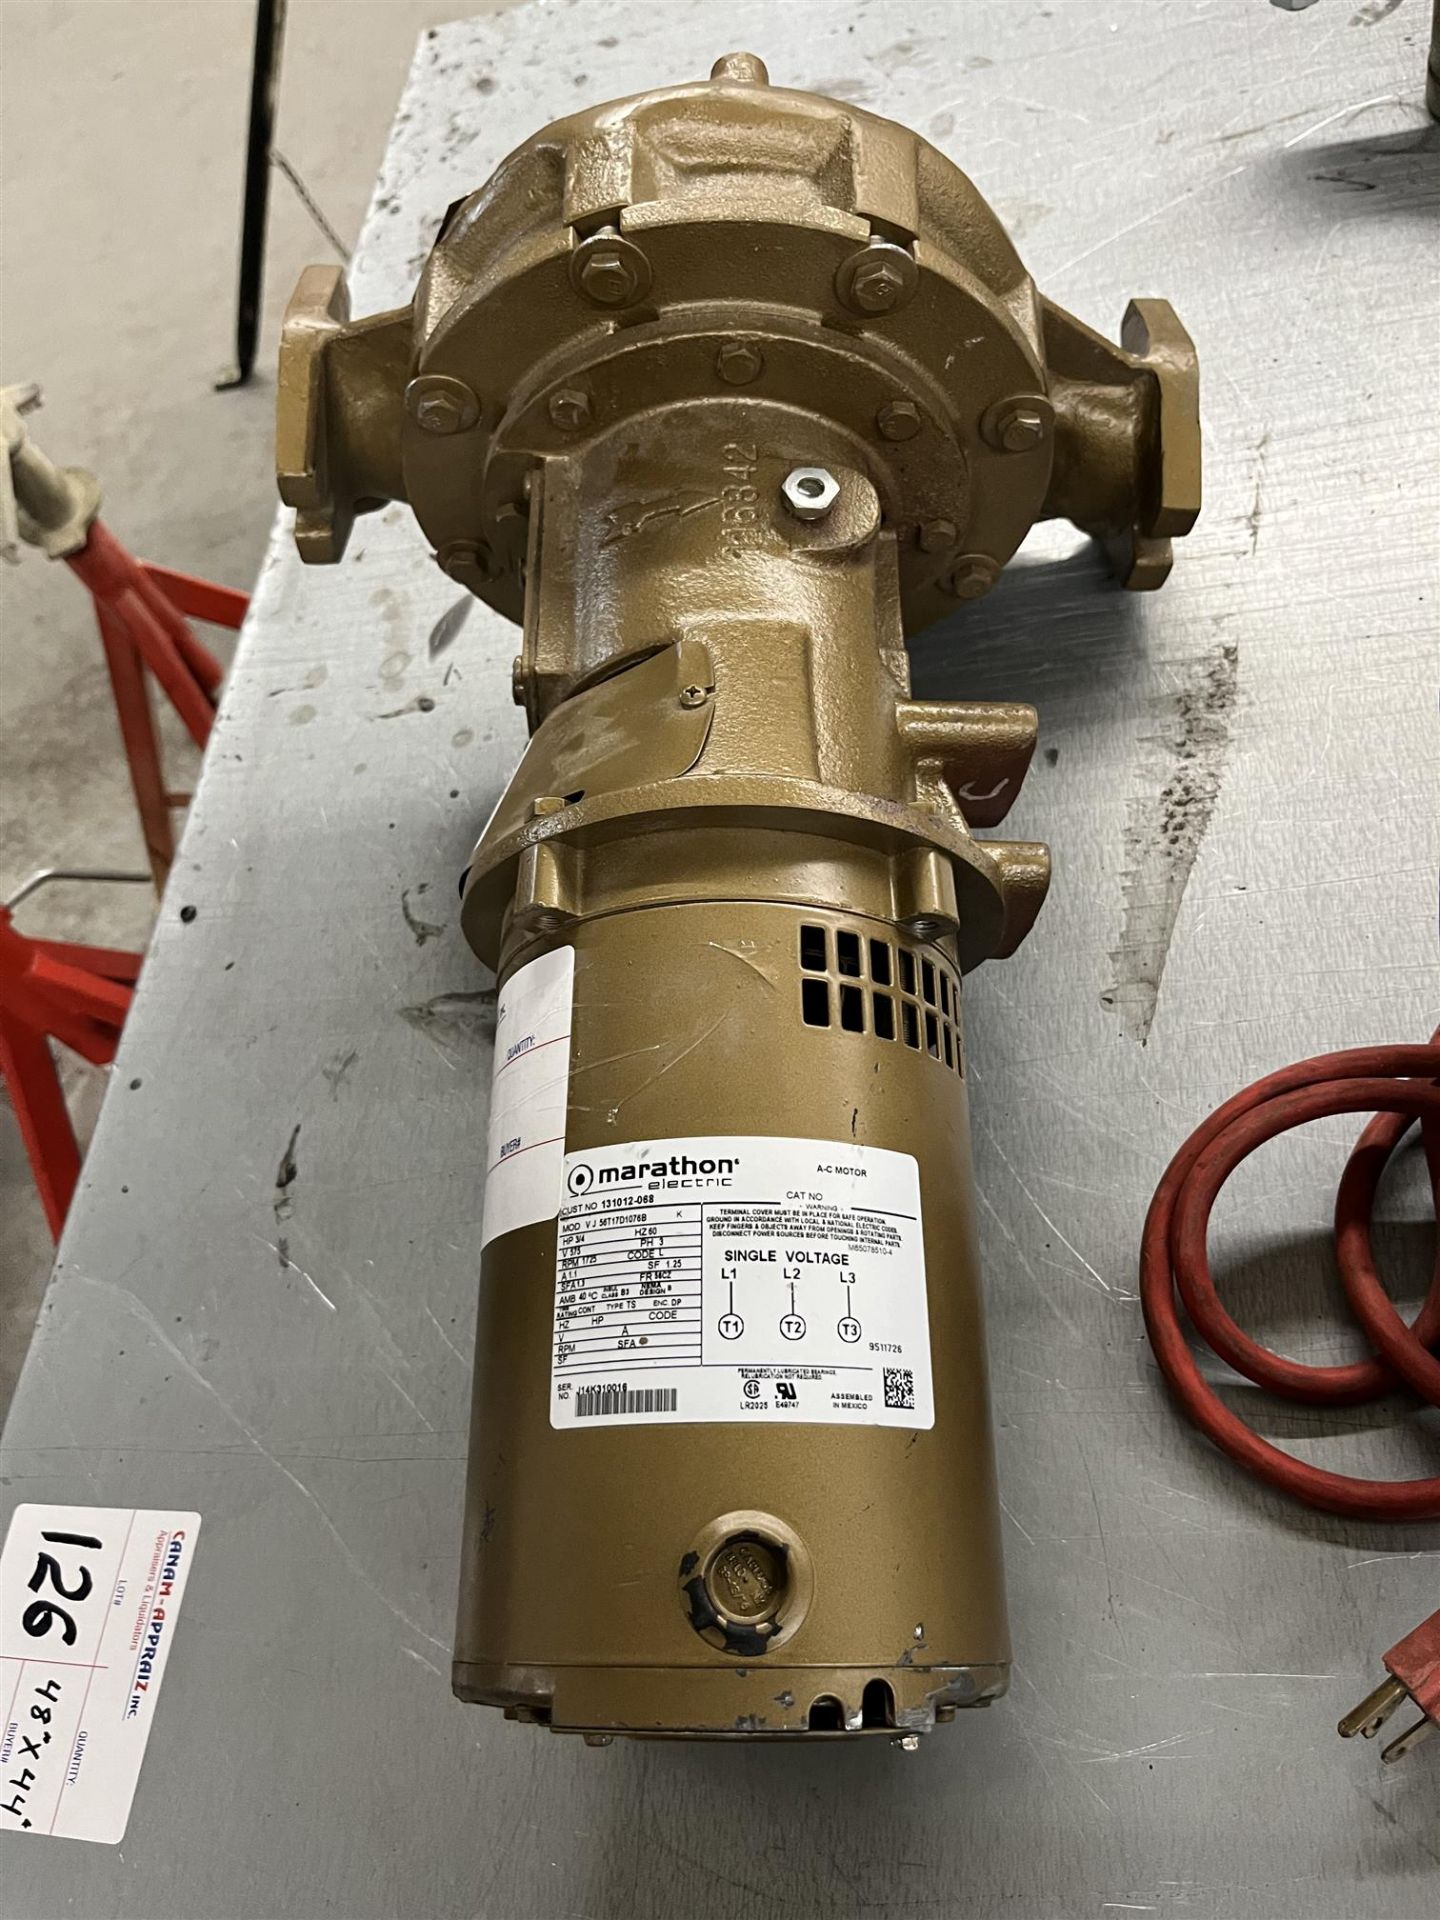 ARMSTRONG 1.5D 1060-001 CENTRIFUGAL PUMP, S/N: 735099, 30GPM, 30FT, .75 HP, 1800 RPM - Image 2 of 3